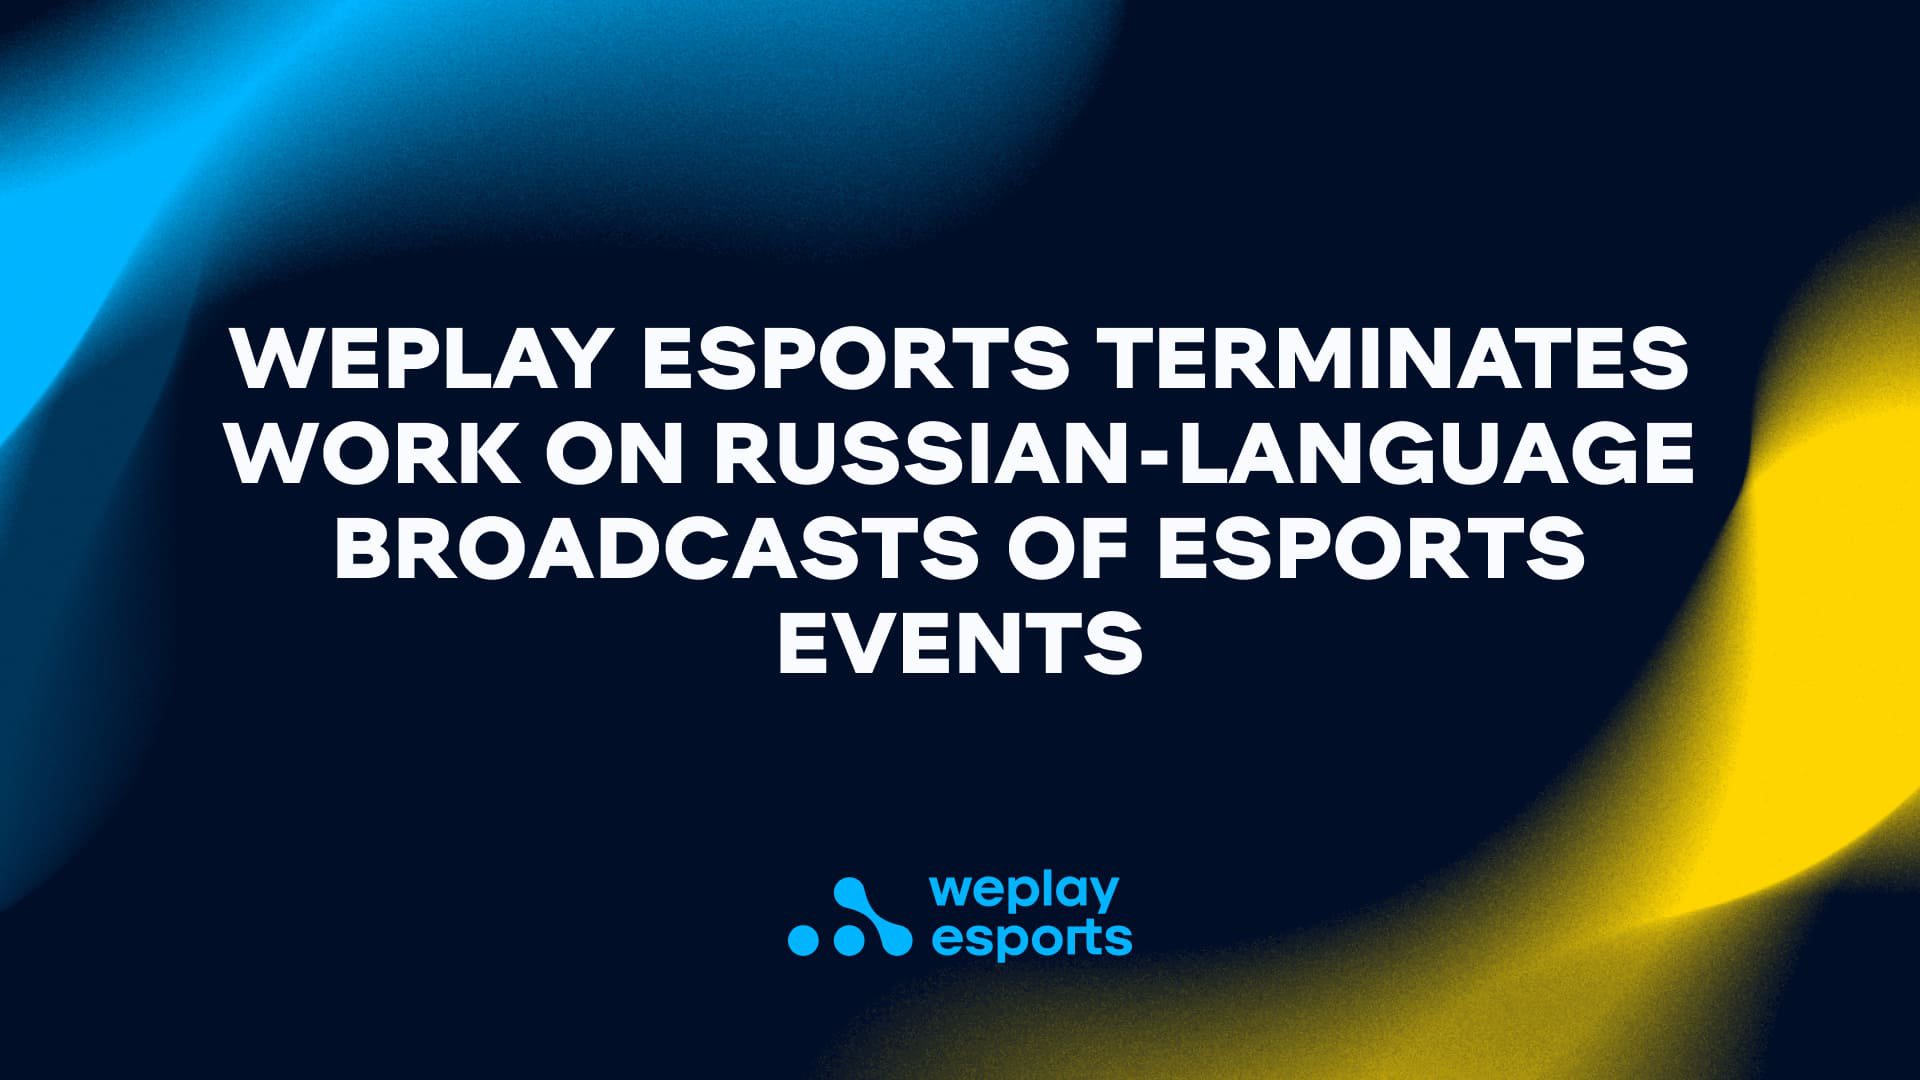 WePlay Esports terminates work on Russian-language broadcasts of esports events. Visual: WePlay Holding